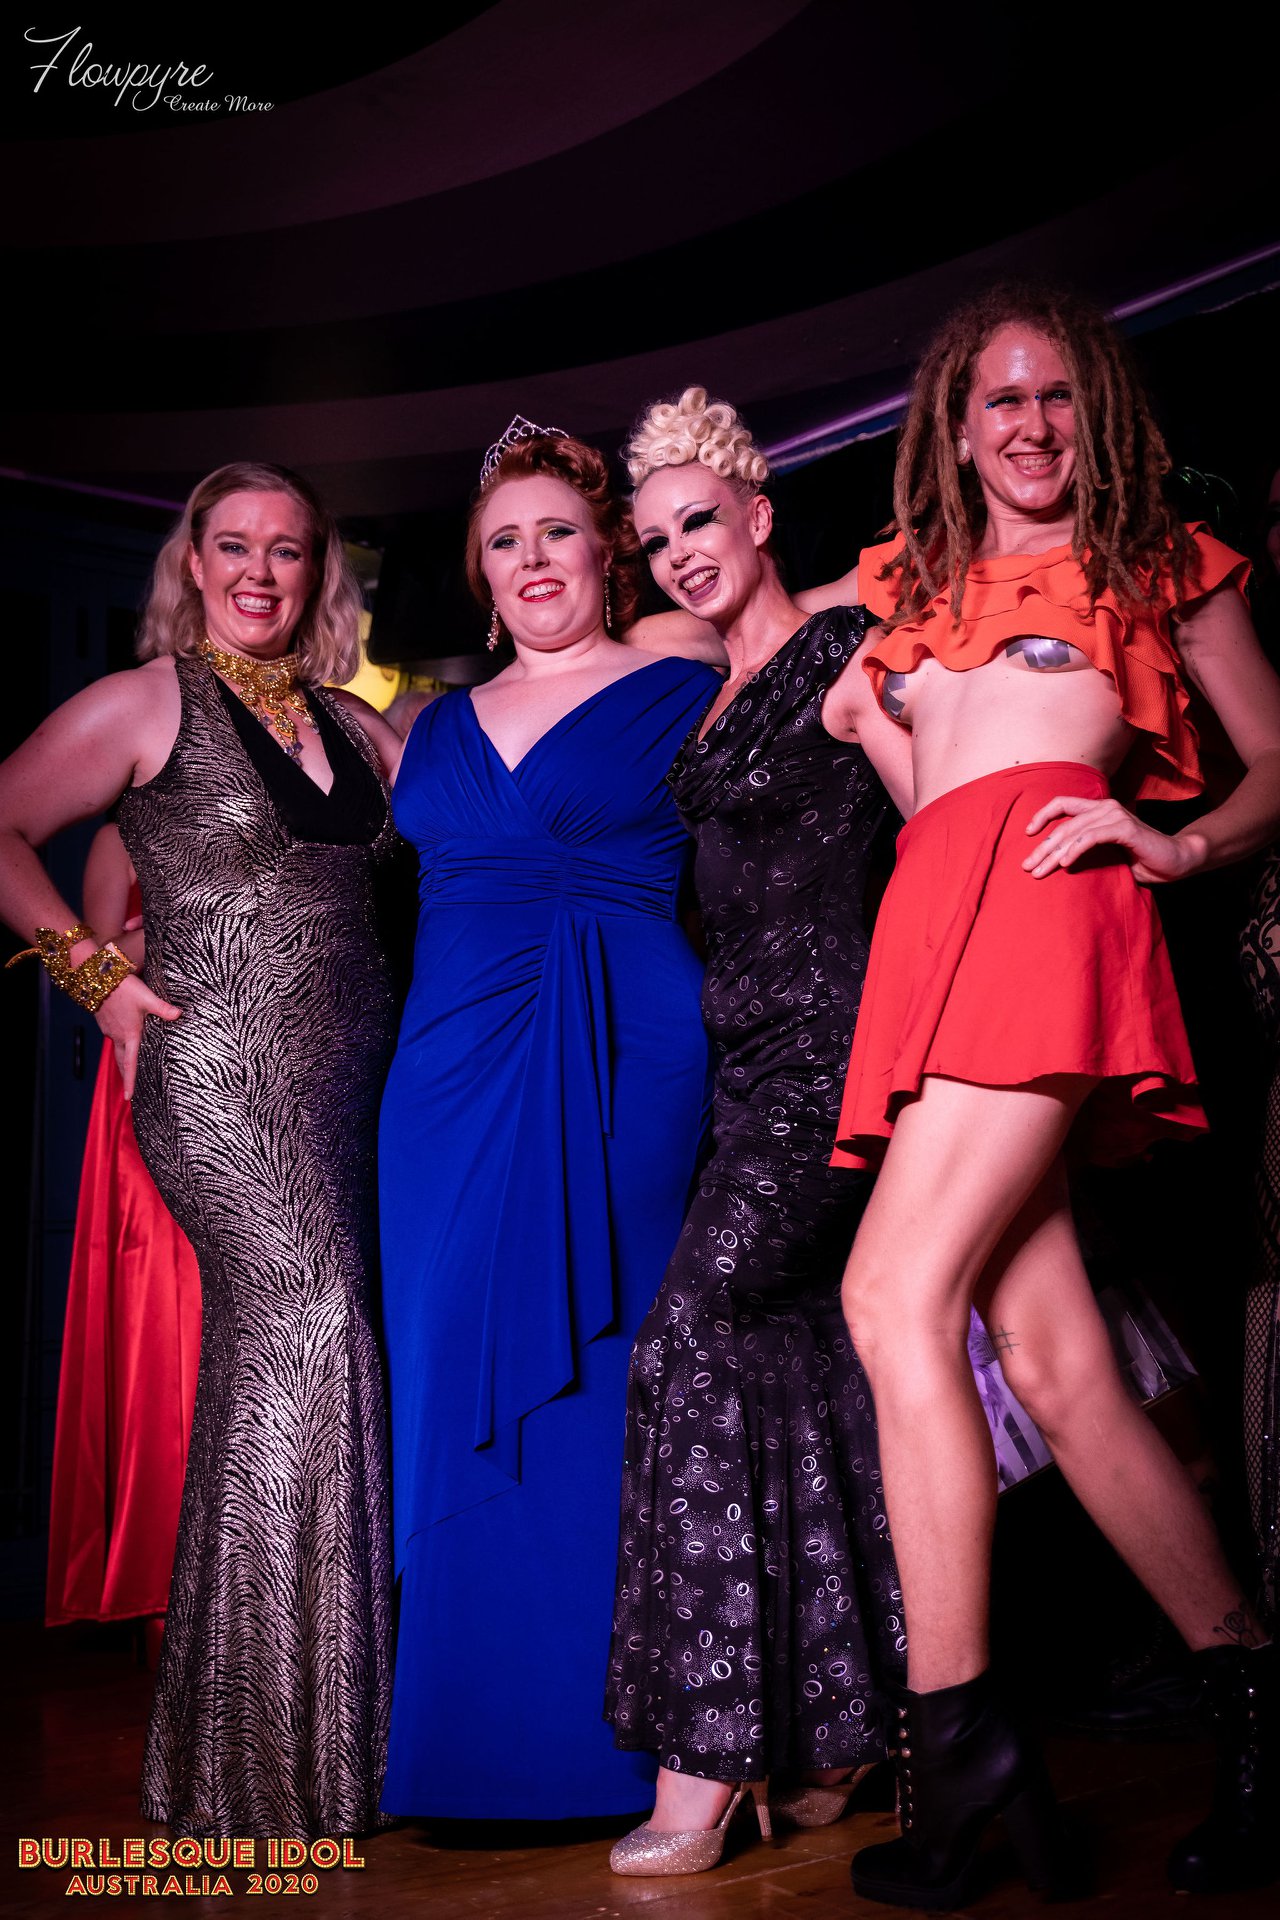 Mae de la Rue, Millie Devine, Scarlet Tinkabelle, and Hanna Illingworth on stage at the conclusion of Burlesque Idol Darwin 2020